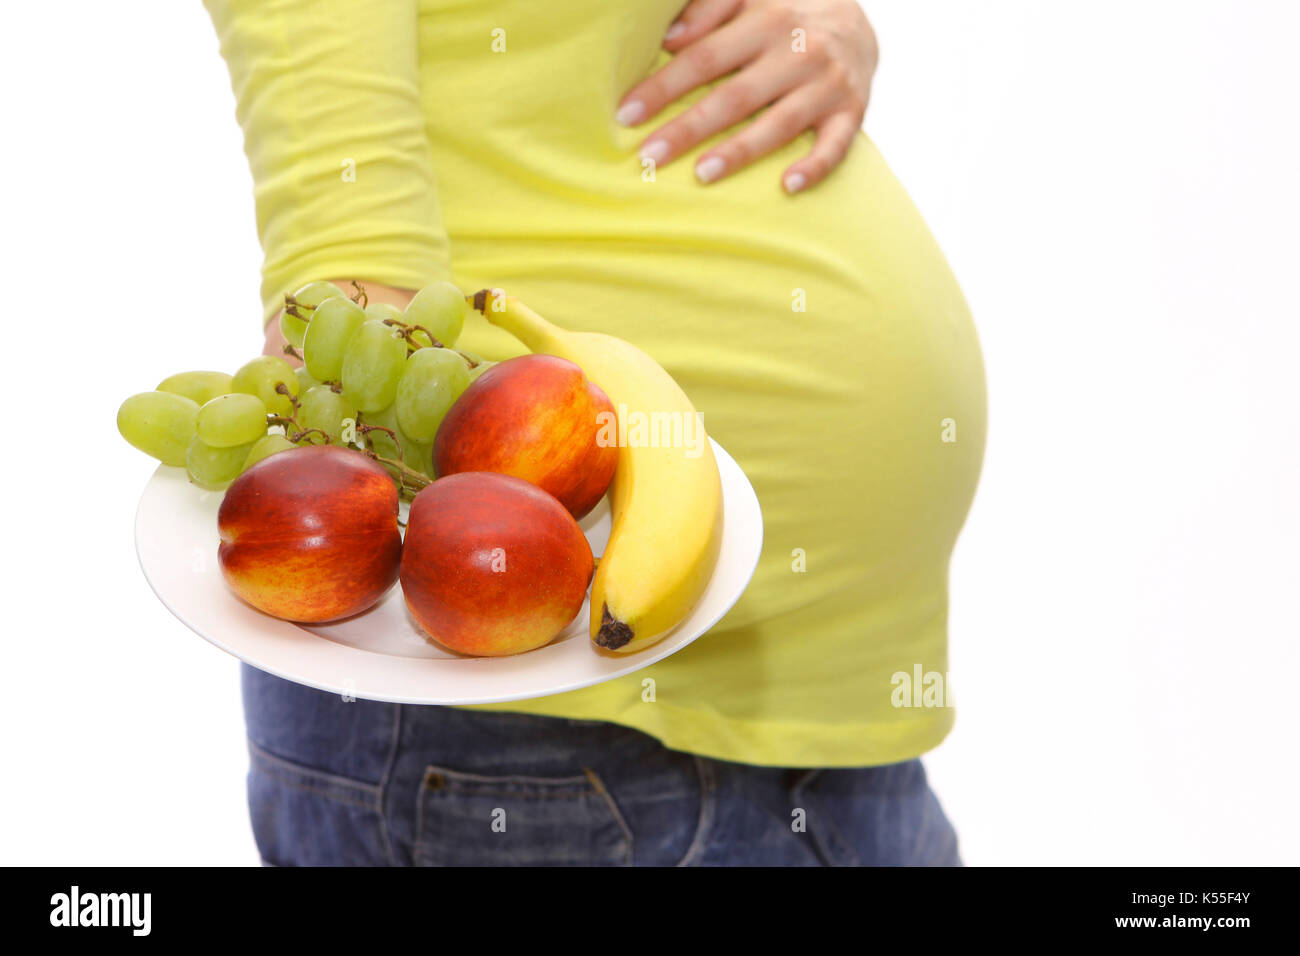 Pregnant woman with a plate of fresh fruit Stock Photo